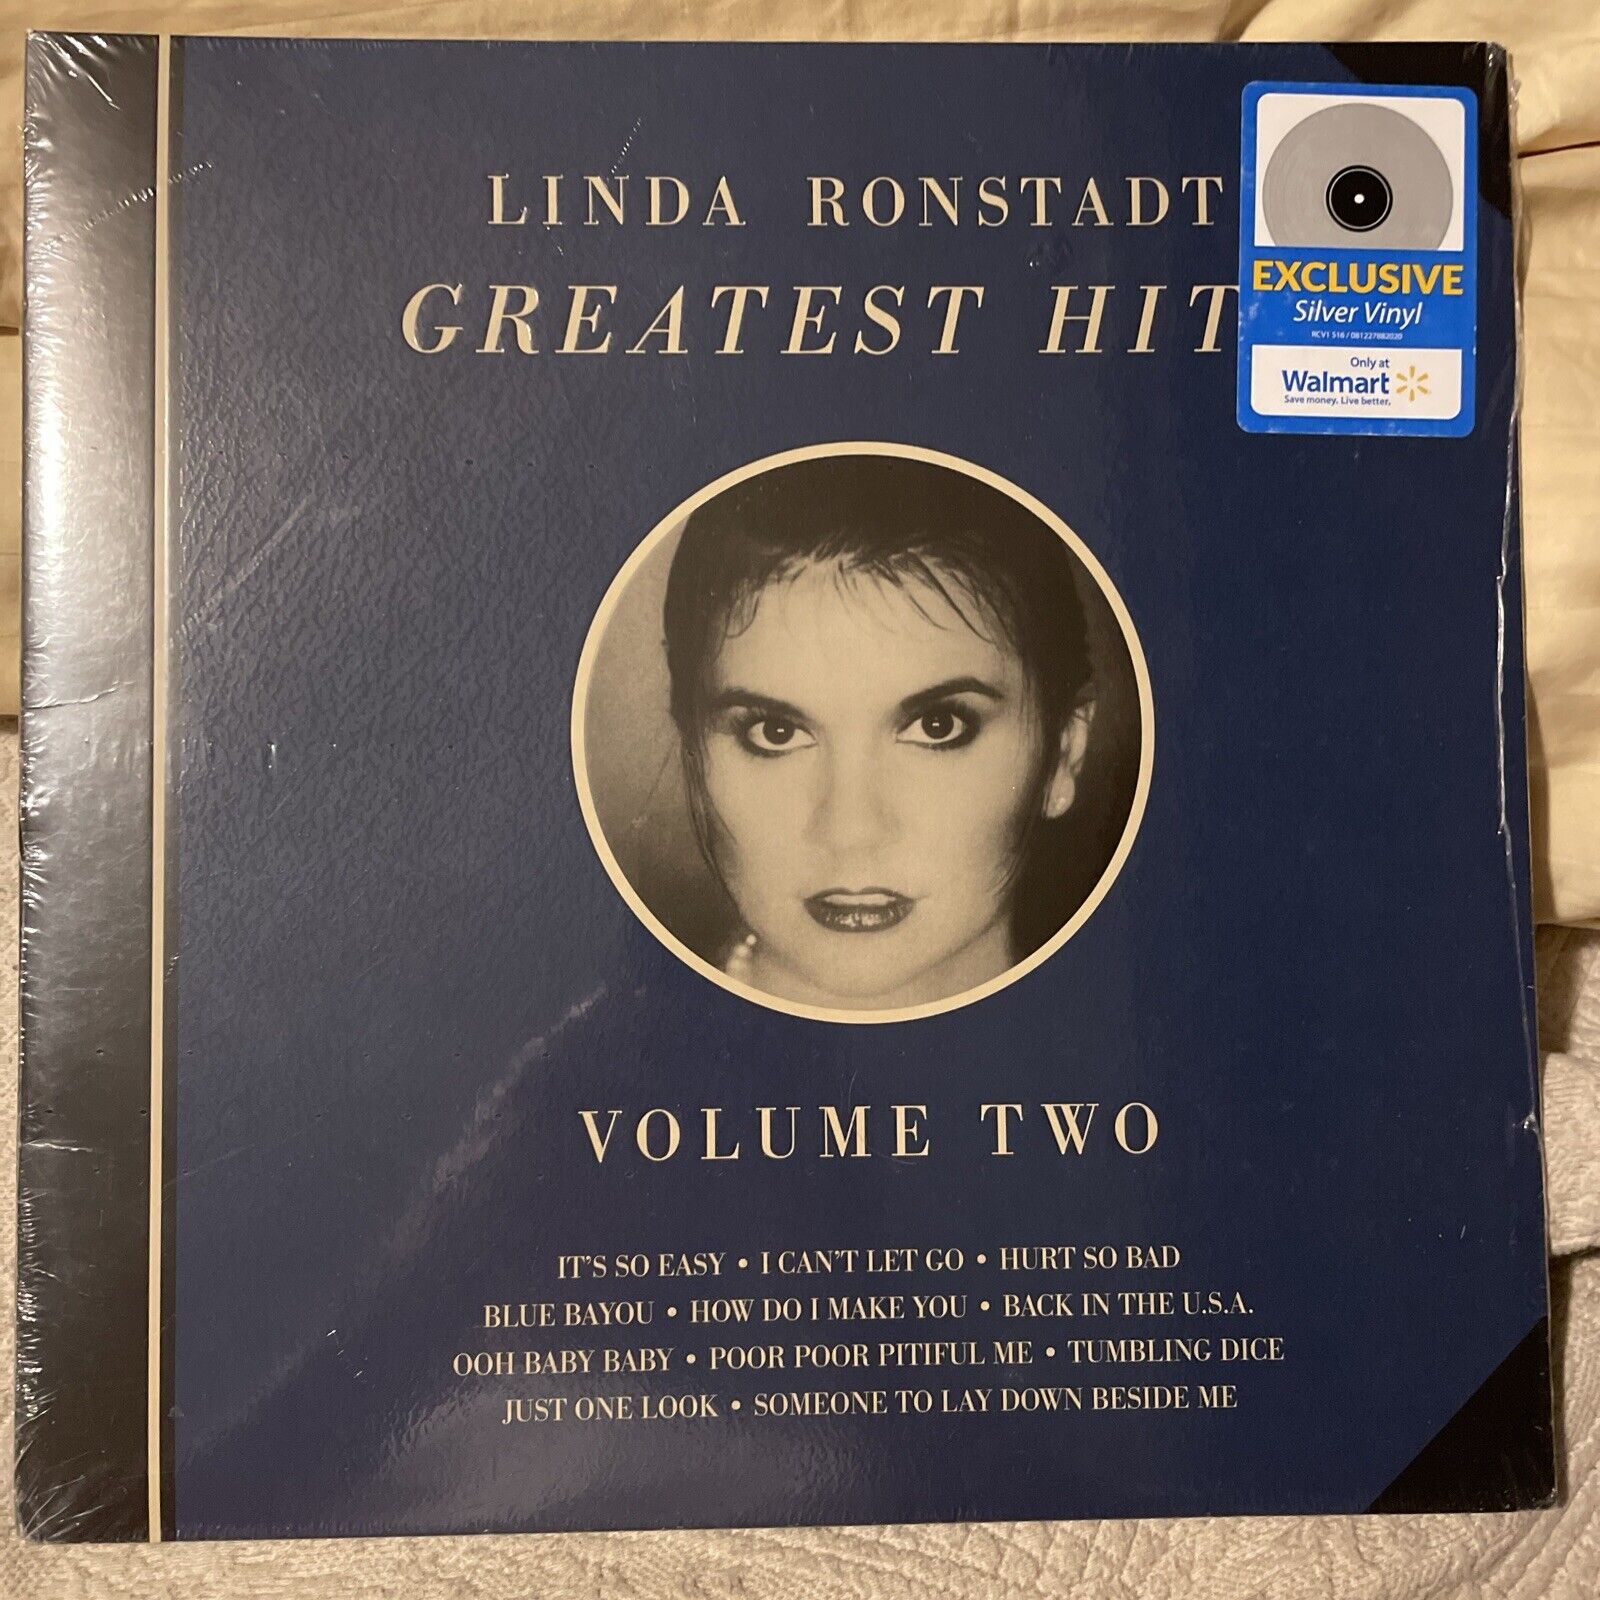 Linda Ronstadt Greatest Hits Volume Two Limited Silver Vinyl Record NEW SEALED